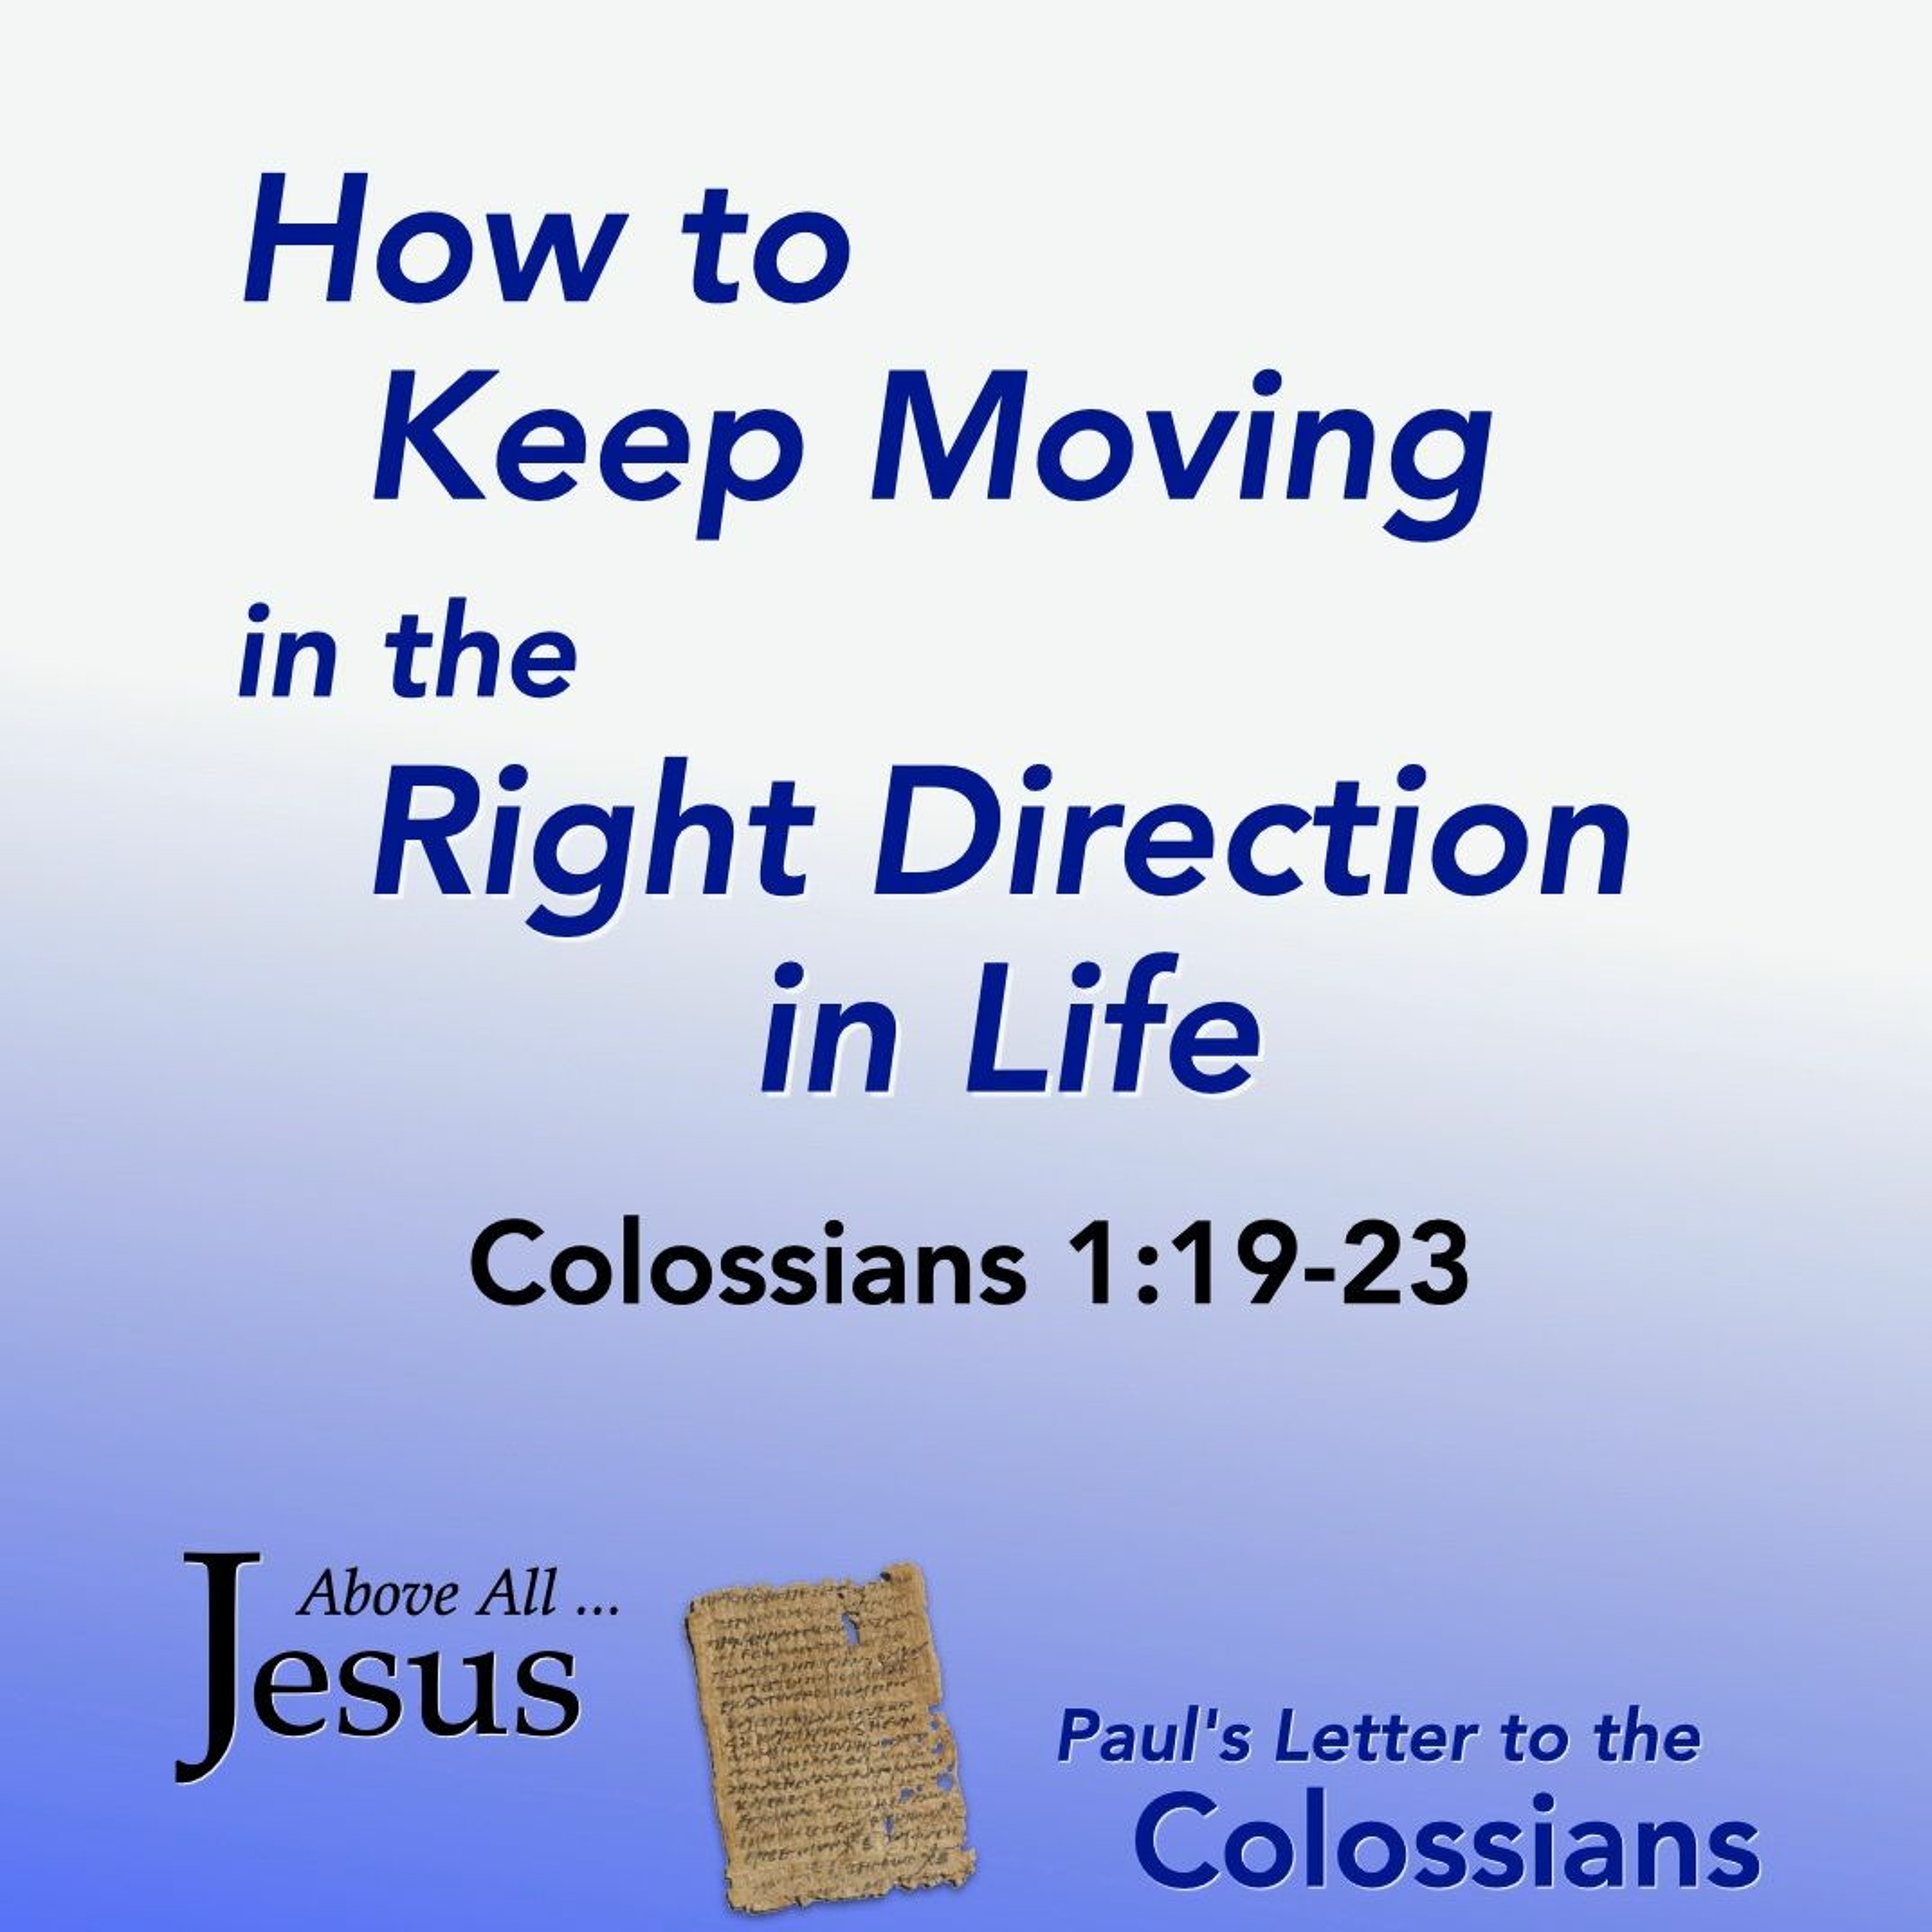 10-16-22 How to Keep Moving in the Right Direction in Life